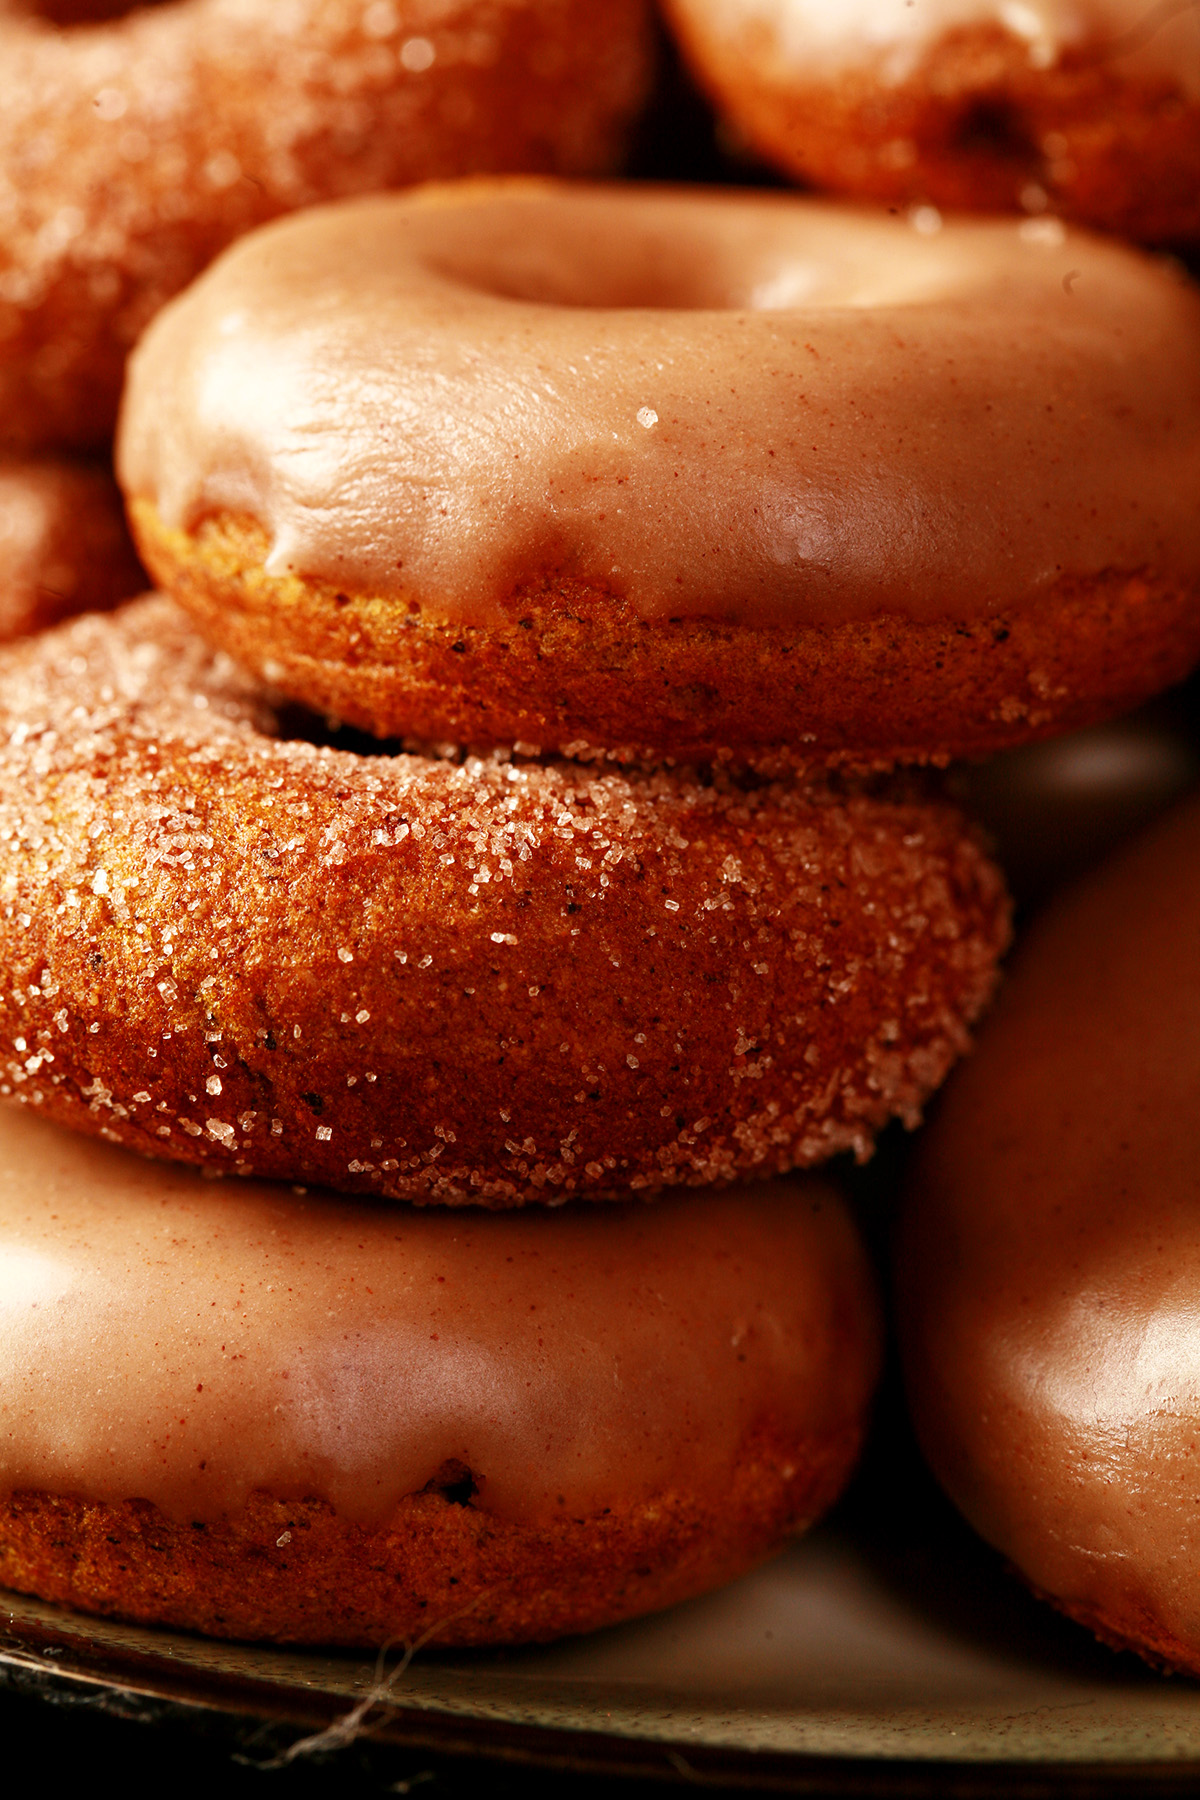 Close up view of gluten-free pumpkin spice mini doughnuts. Some are coated in cinnamon sugar, others are glazed with a tan coloured frosting